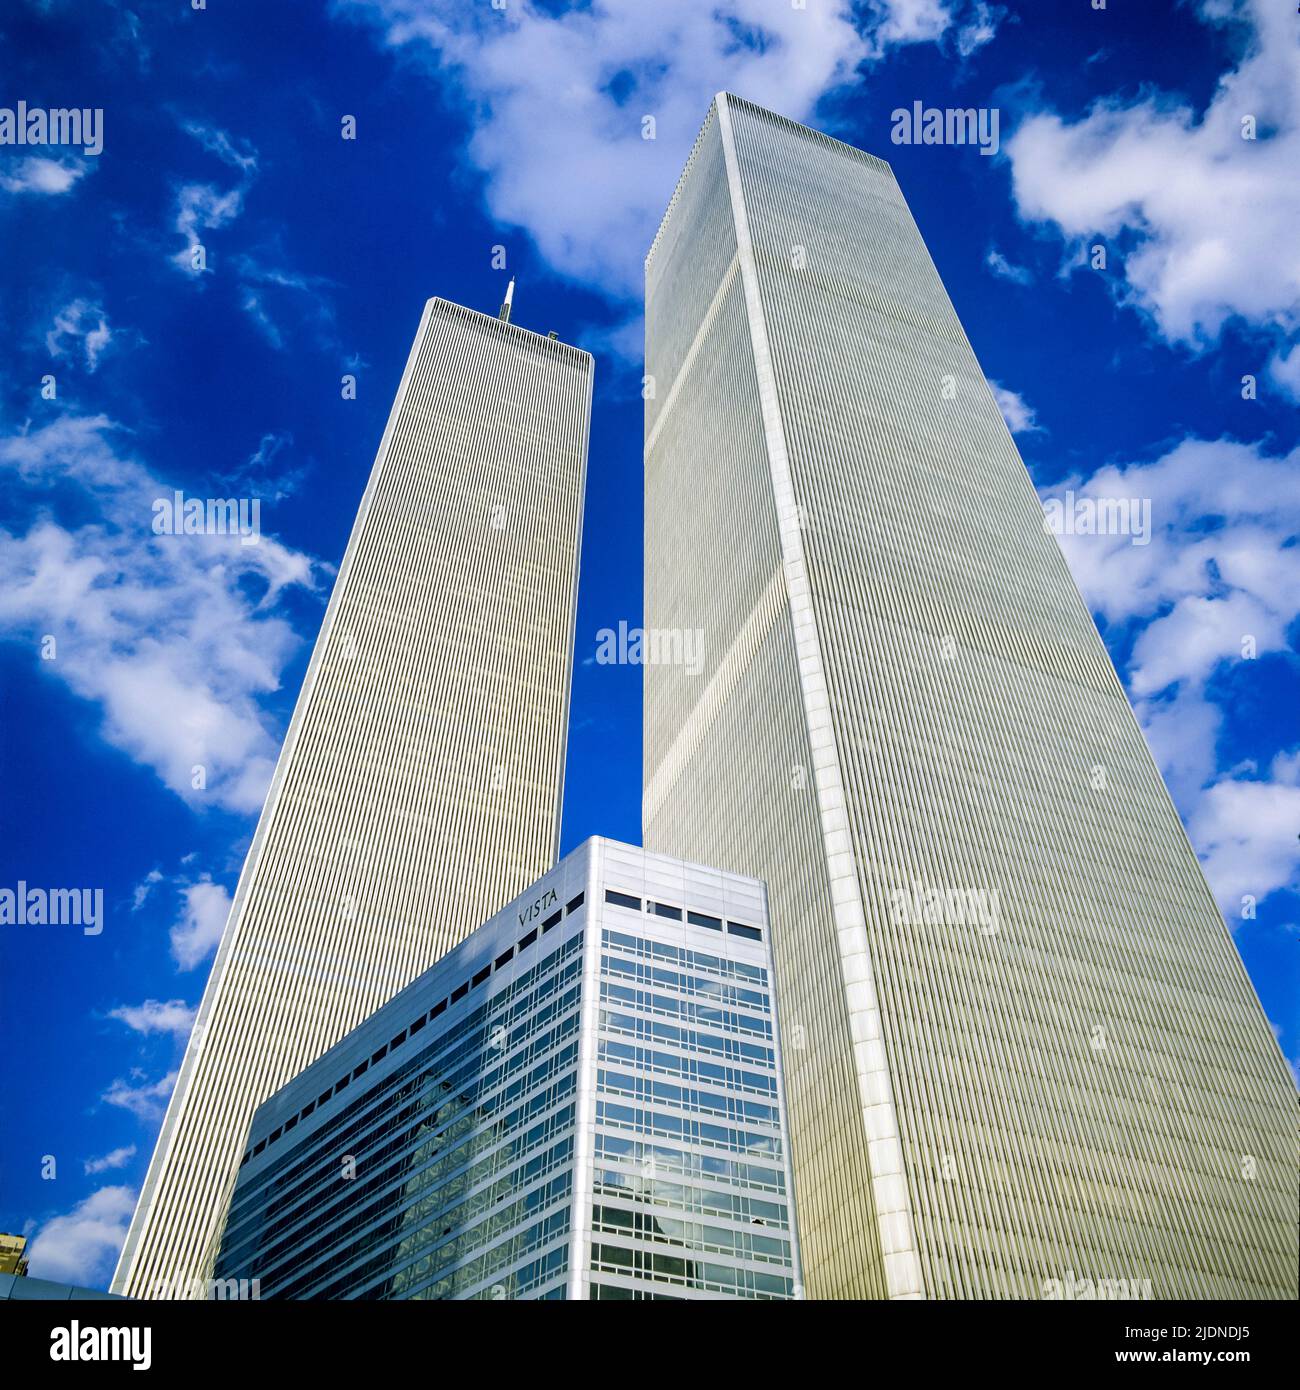 New York 1980s, WTC World Trade Center twin towers, Vista hotel,  building, financial district, lower Manhattan, New York City, NYC, NY, USA, Stock Photo